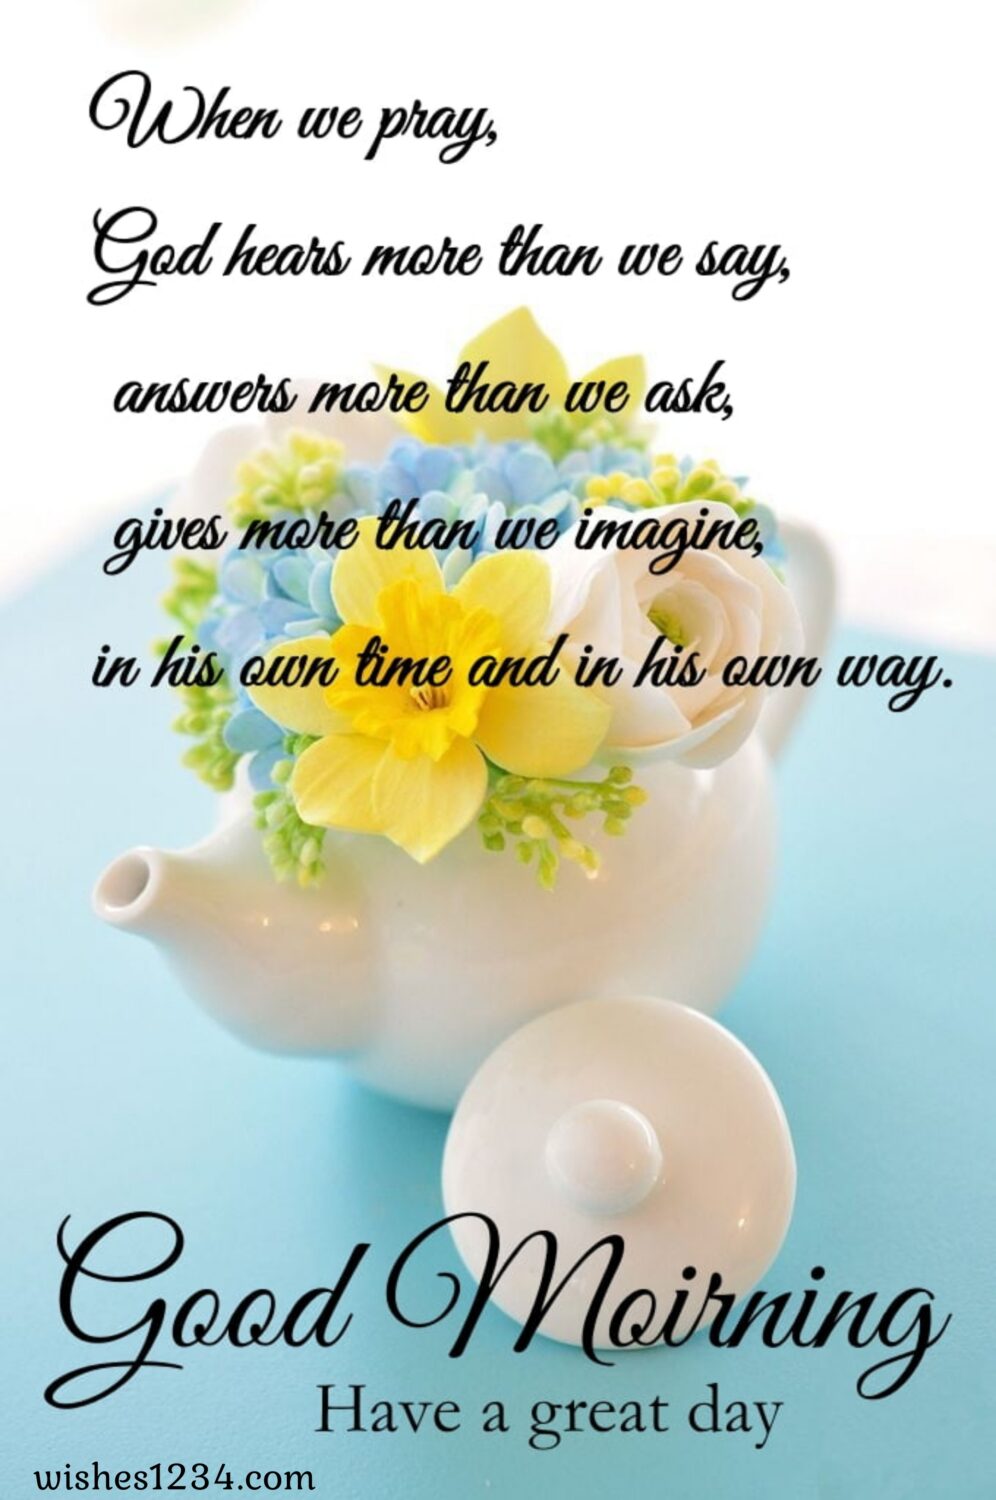 Kettle with flowers, Quotes about Friday | Friday blessings.